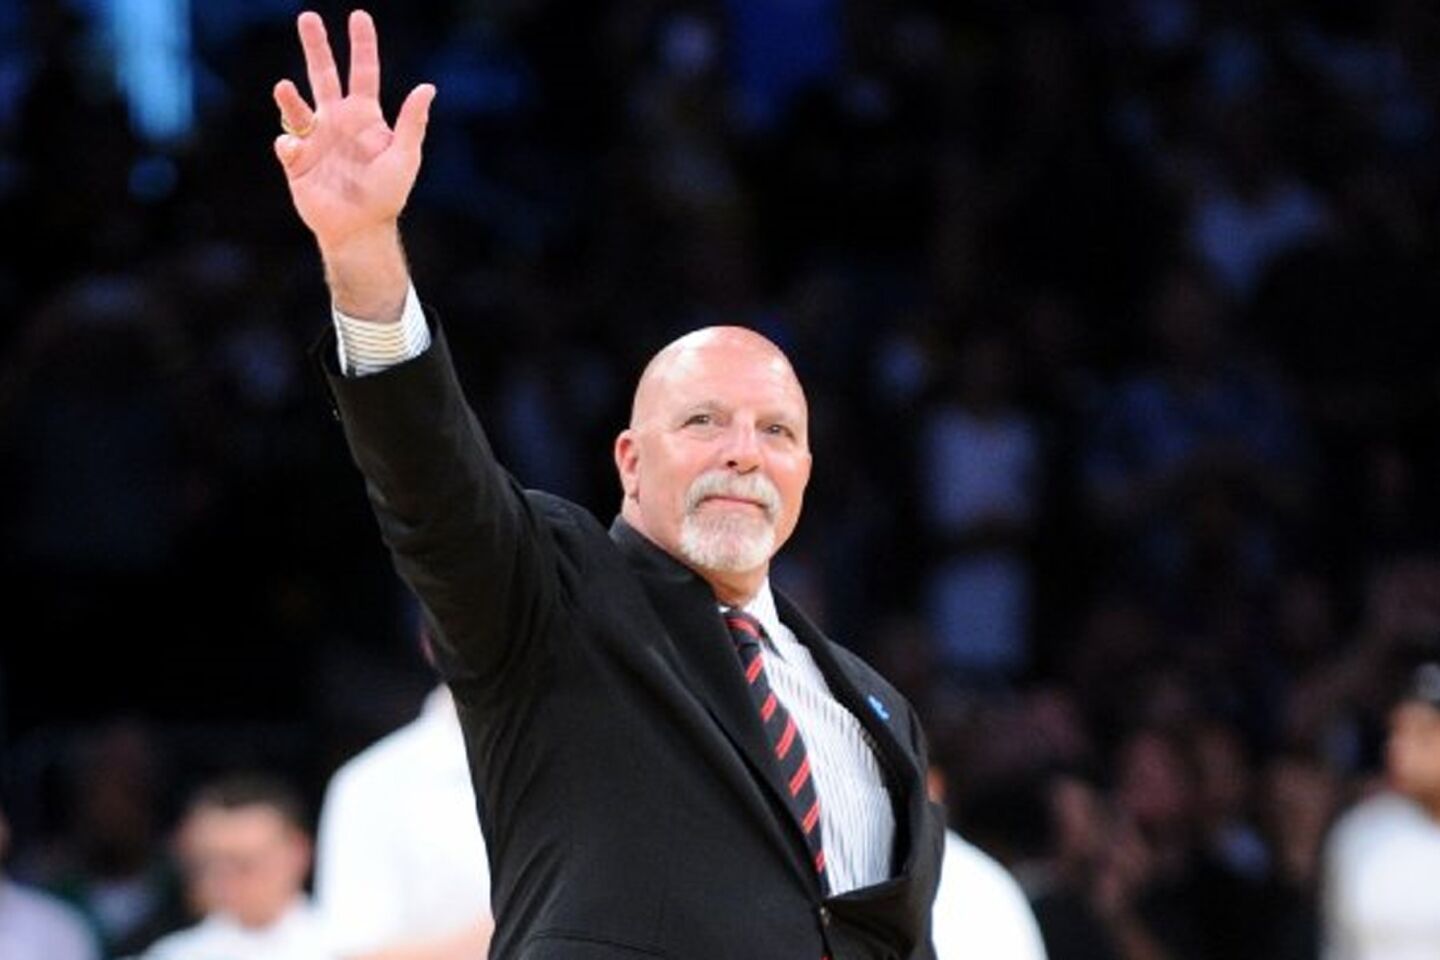 Retiring trainer Gary Vitti is honored by the Lakers